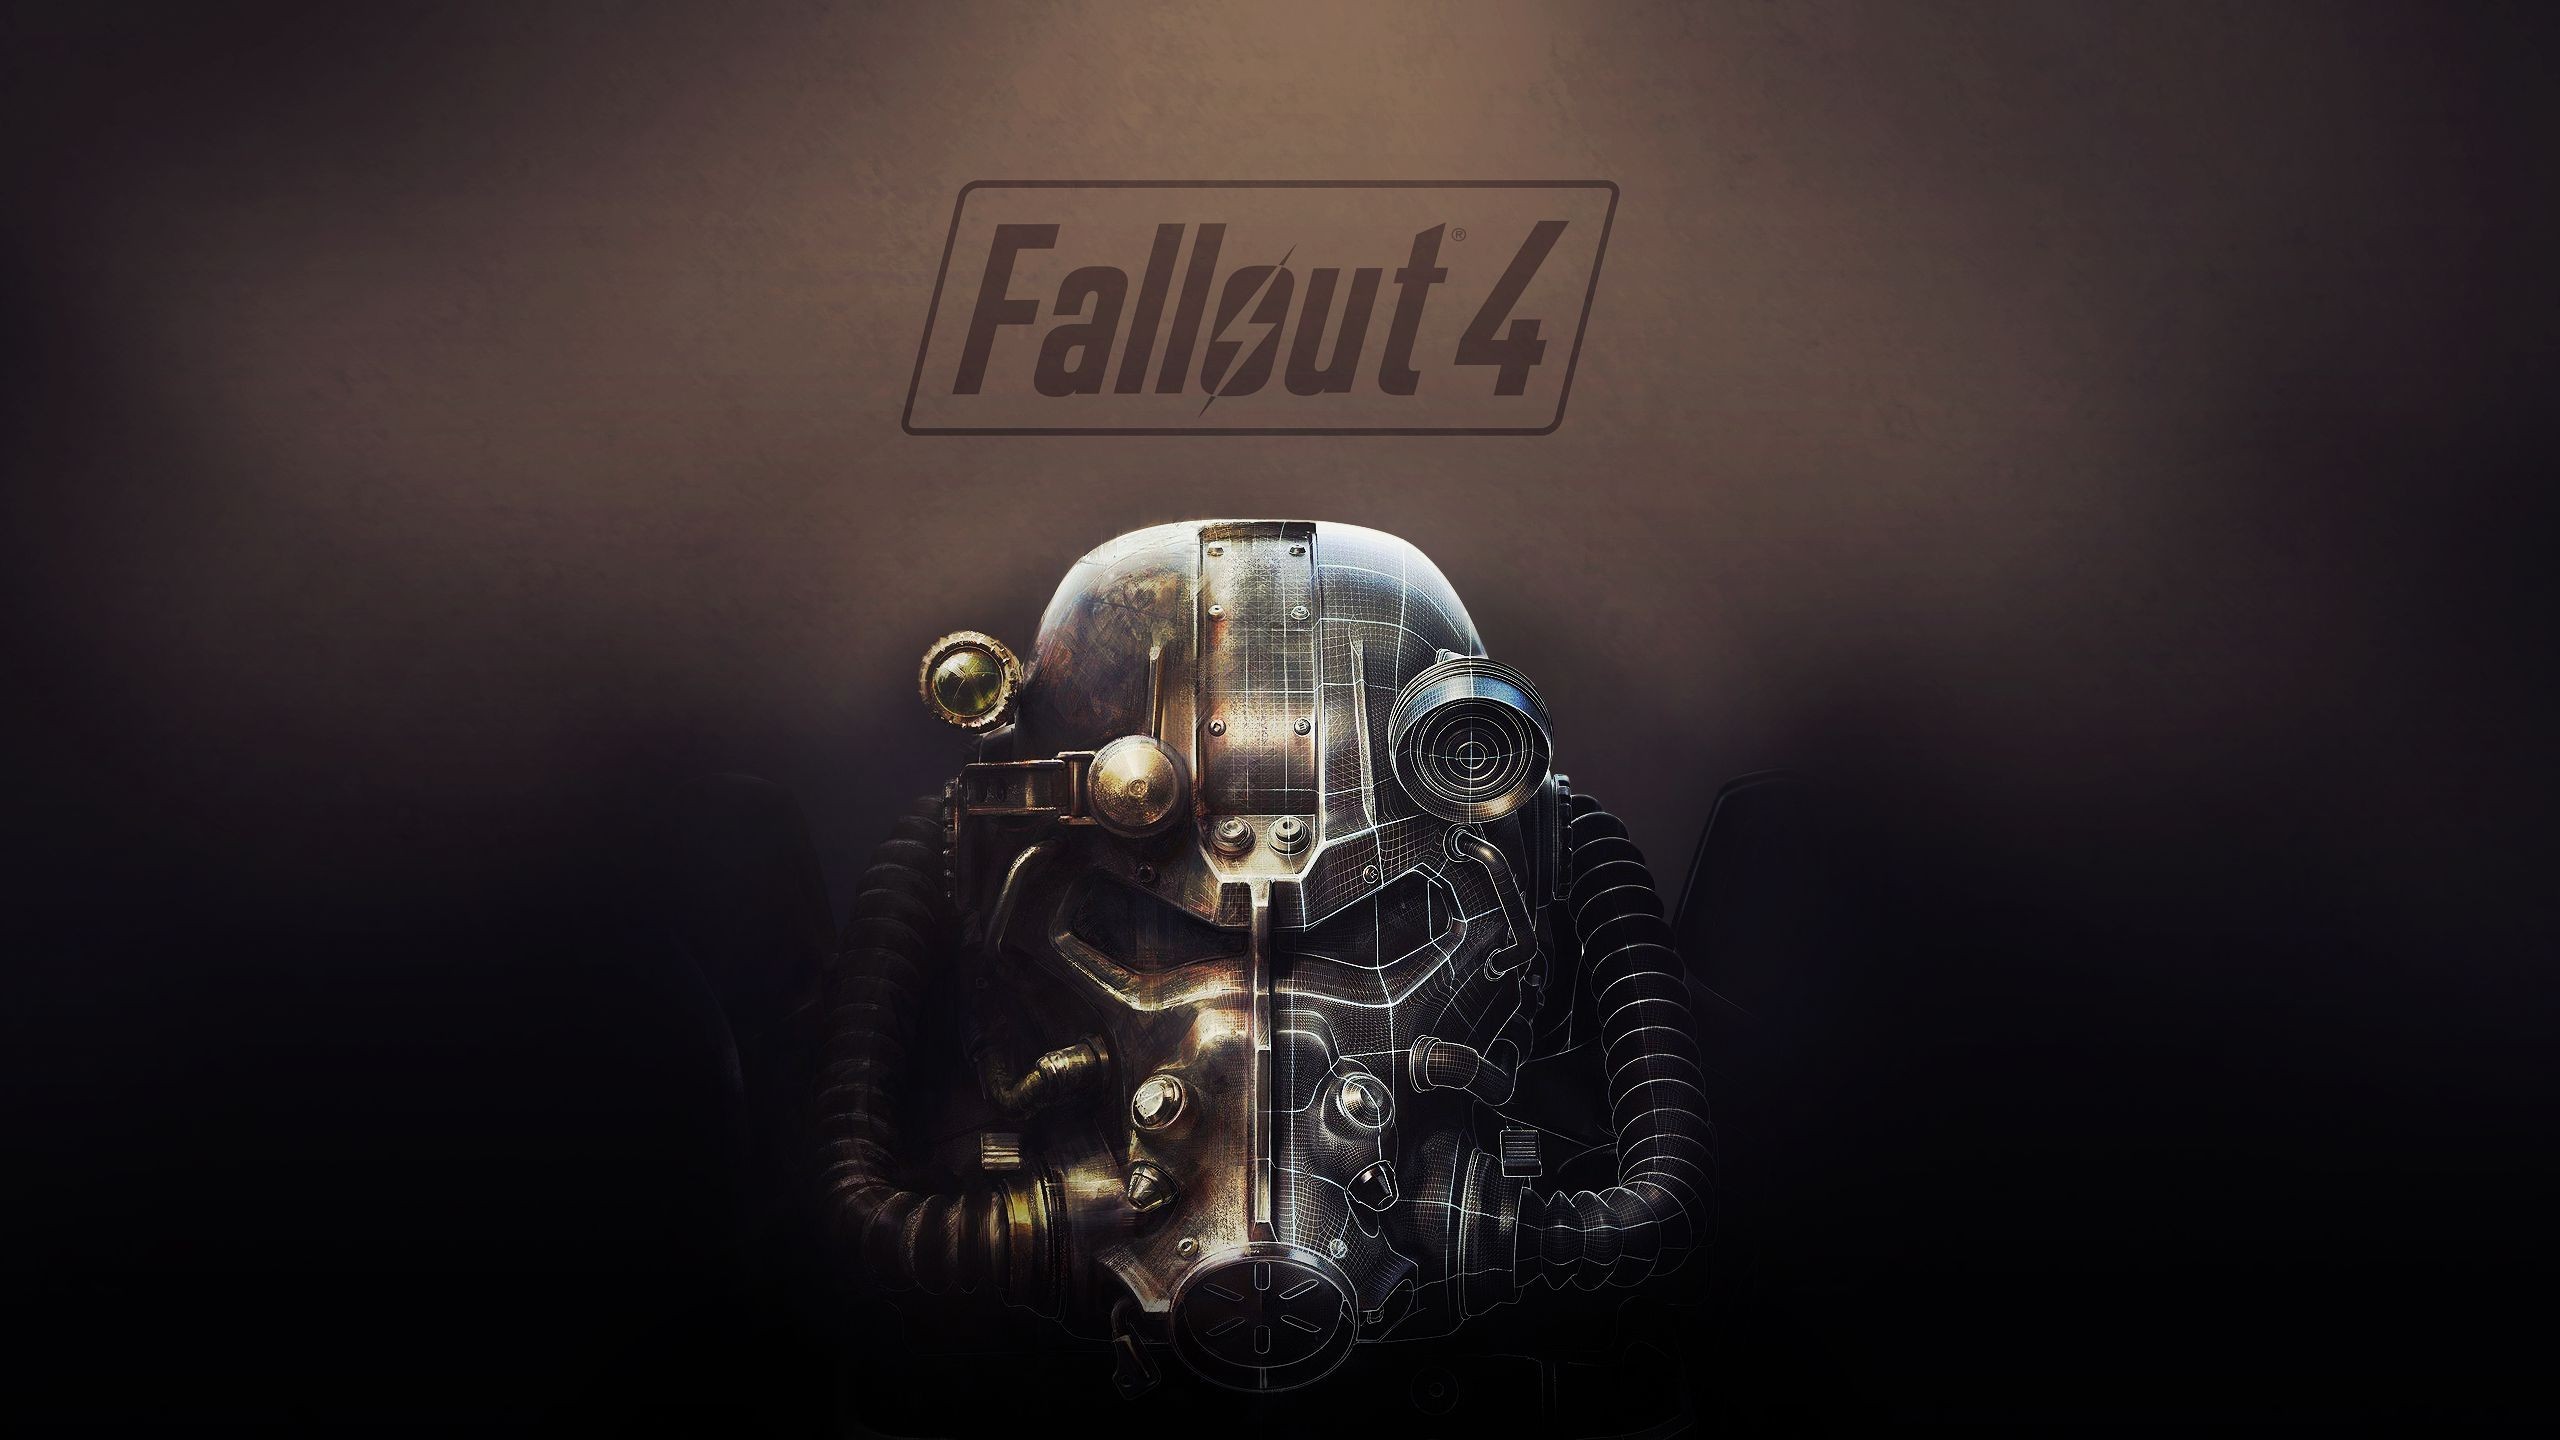 2560x1440 Fallout 4 wallpaper http://mbawallpaperscom.ipage.com/gaming .